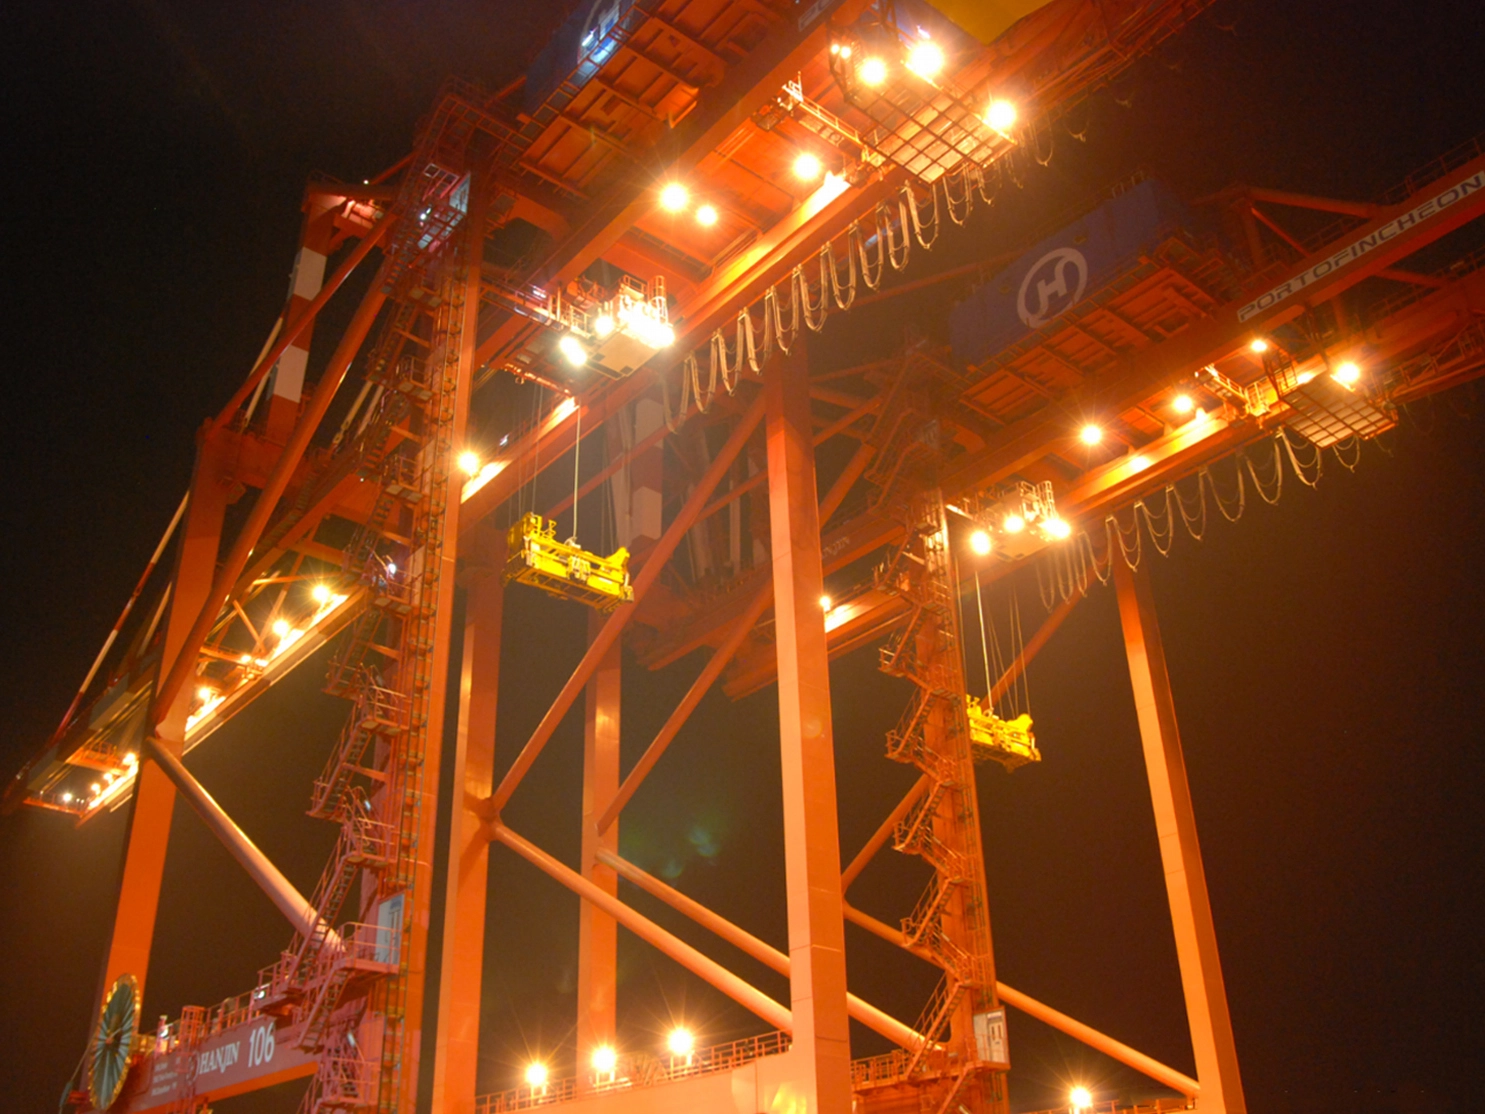 Outdoor led lights of Incheon Port in South Korea